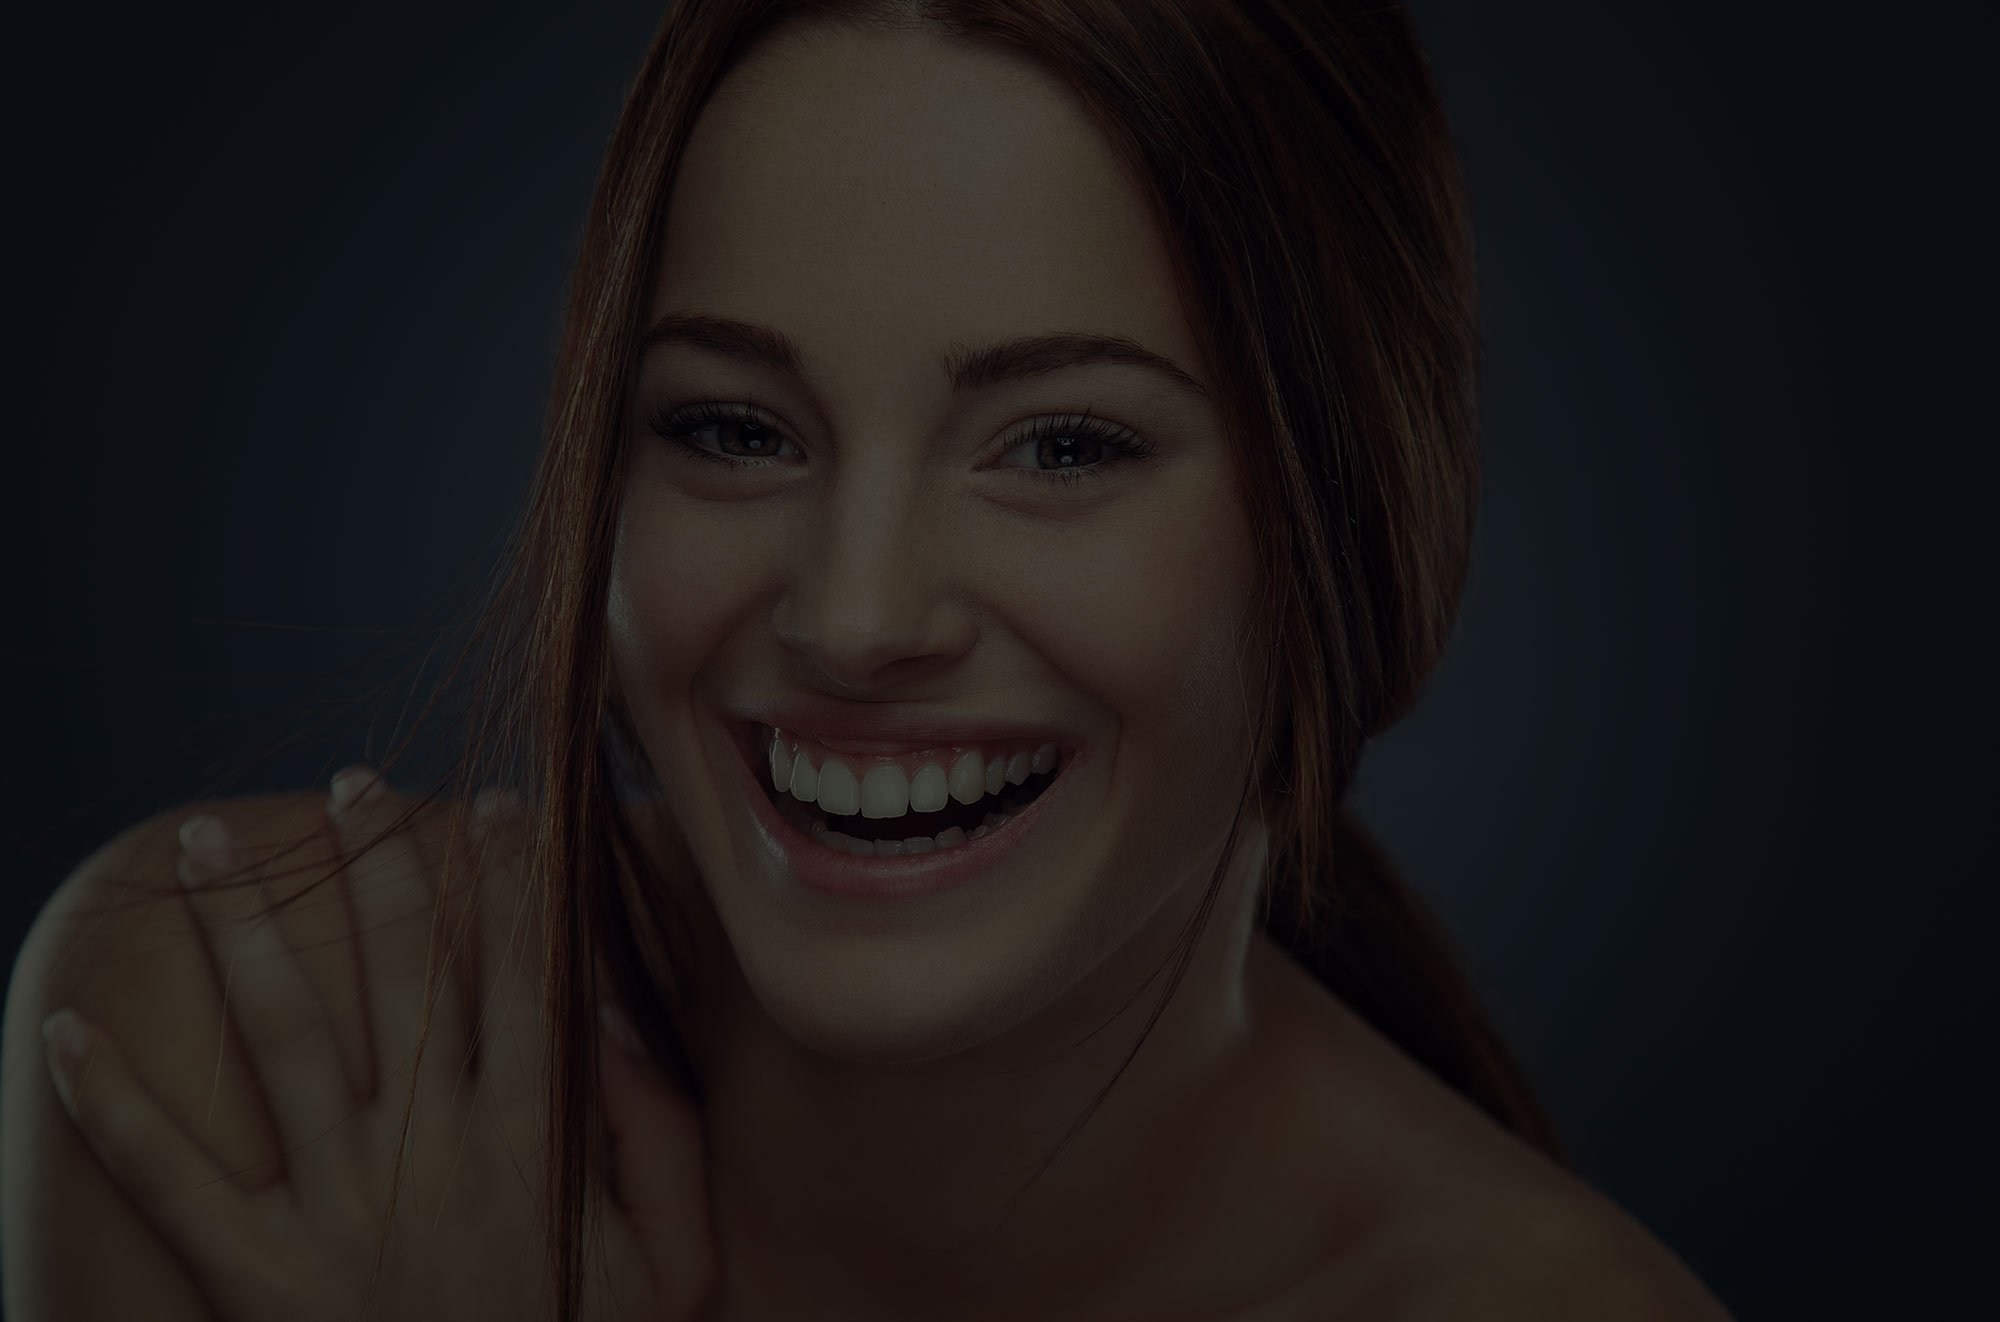 Woman with brown hair smiling with smooth skin and symmetric features.